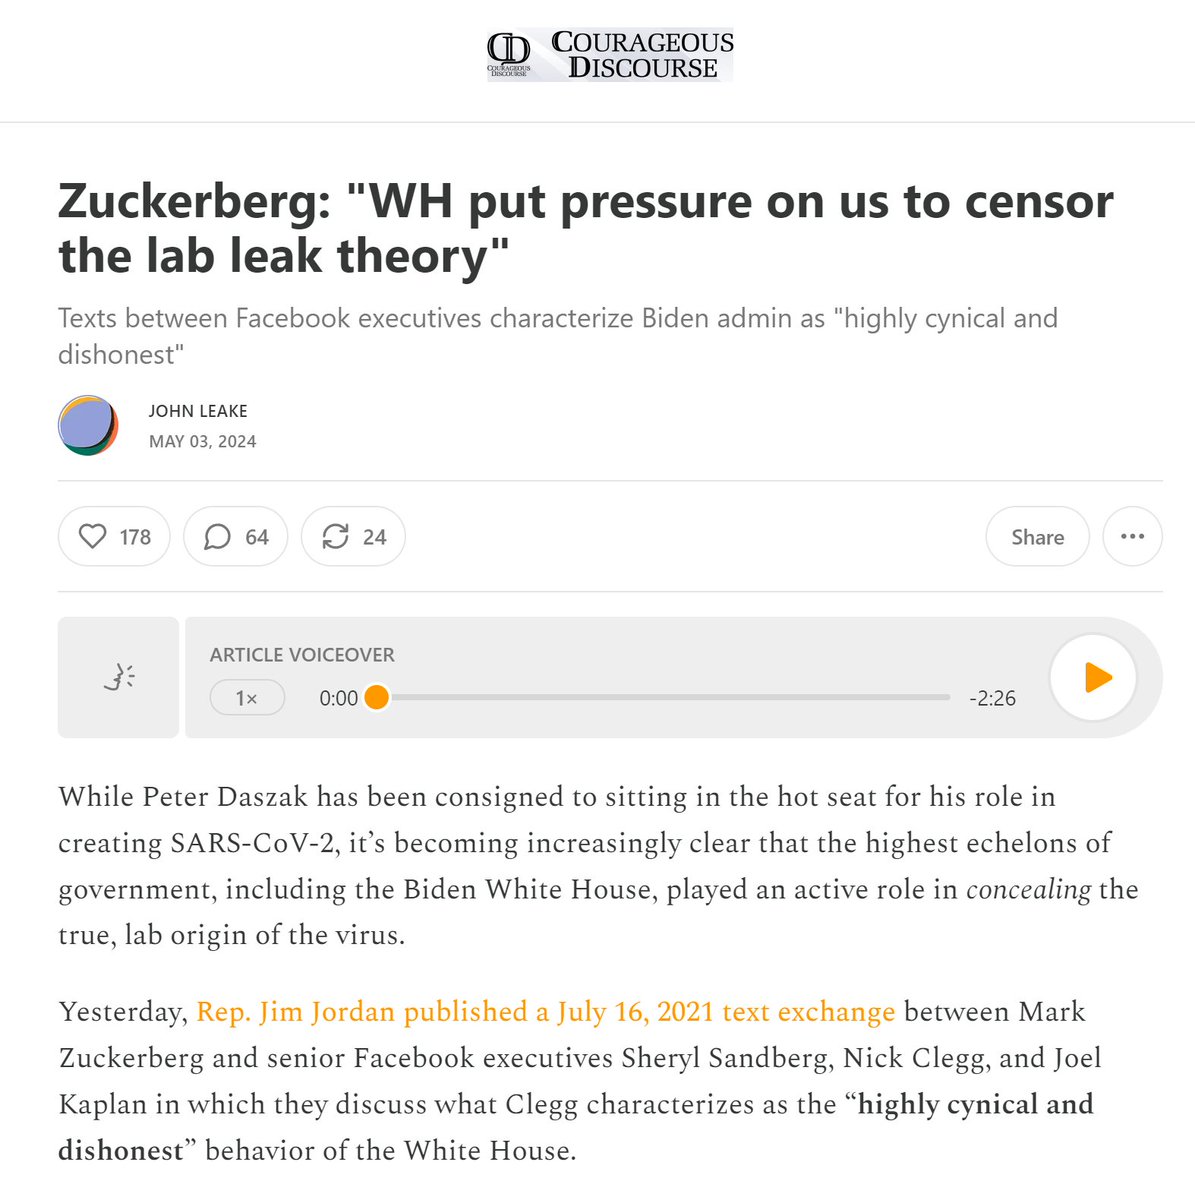 .@Jim_Jordan published a July 16, 2021 text exchange between Mark Zuckerberg and senior @facebook executives Sheryl Sandberg, Nick Clegg, and Joel Kaplan in which they discuss what Clegg characterizes as the “highly cynical and dishonest” behavior of the White House.…